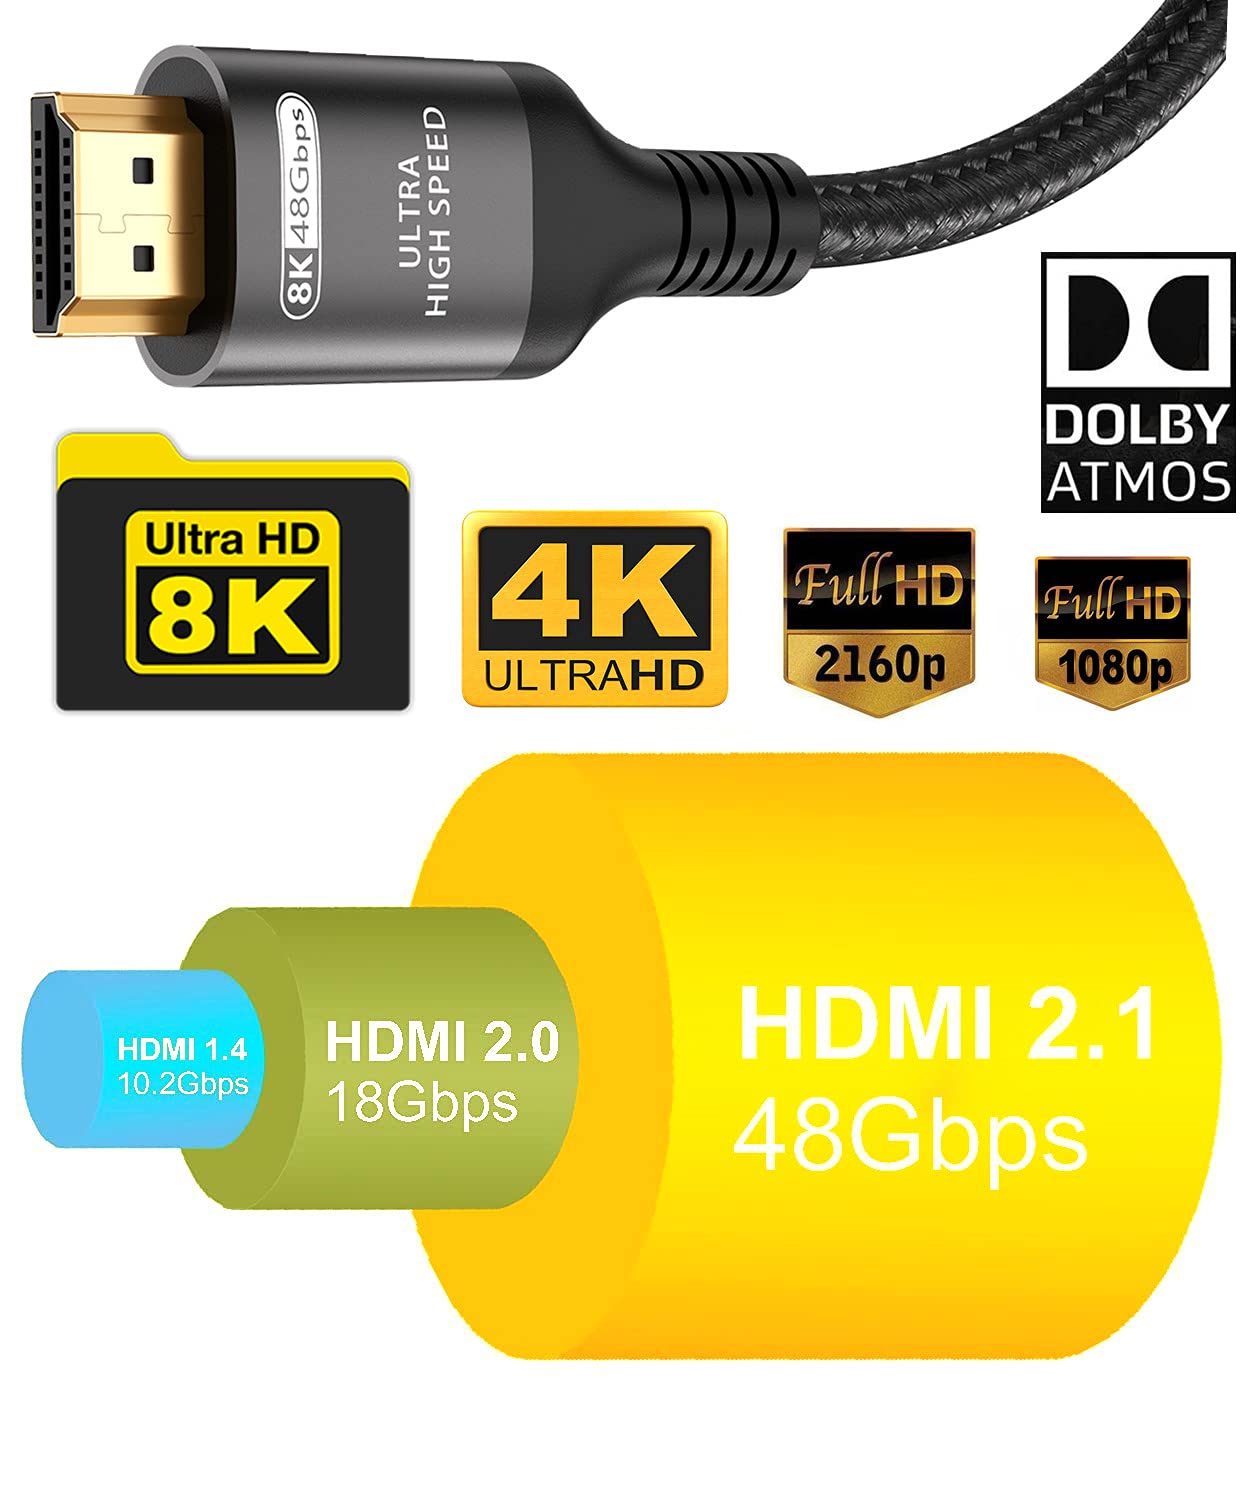 Certified 8k 48Gbps HDMI Cable 4k 120Hz 144Hz 8k 60Hz Ultra High Speed HDMI 2.1 Cable Support ARC eARC 1ms 12Bits DTS:X Dolby Atmos Dynamic HDR10 Compatible for Mac Gaming PC Apple TV+ PS5 4 Xbox (2m)